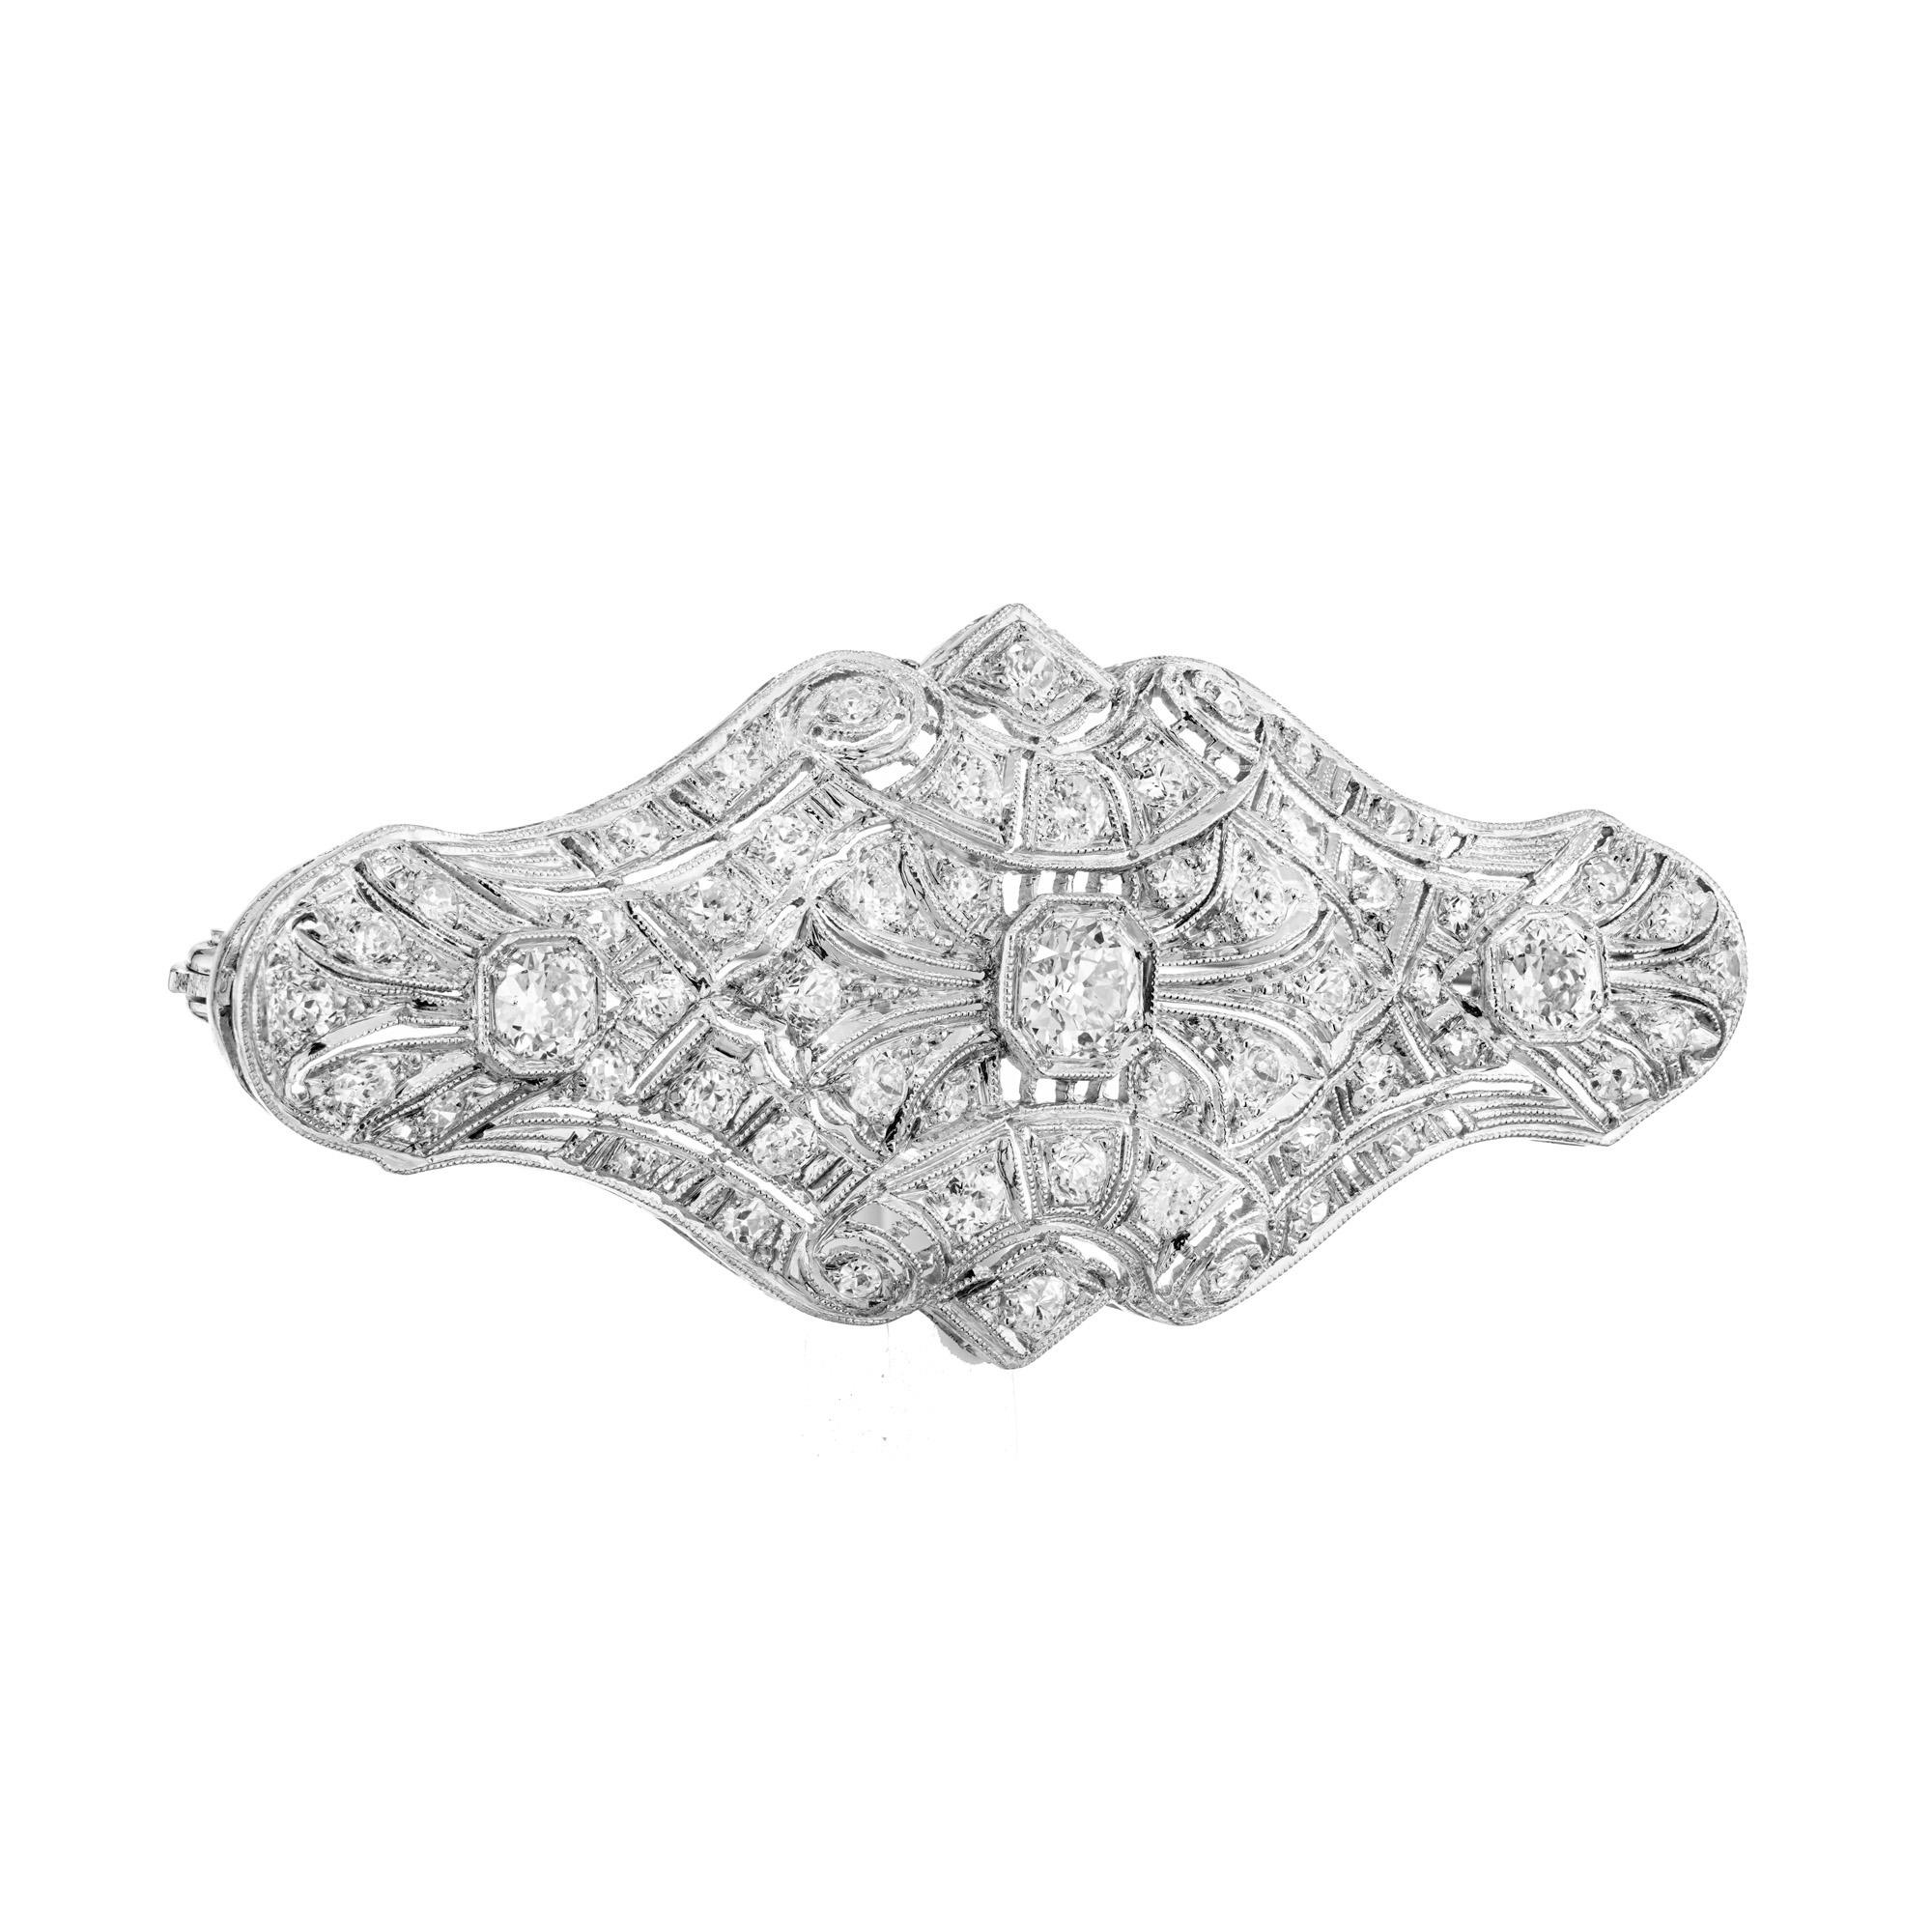 1920's Exquisite Old European Diamond Art Deco Domed Platinum Brooch. This stunning piece of jewelry boasts three Old European cut diamonds that combined, total an approximate carat weight of .98cts. which are accented by 56 round diamonds. Crafted